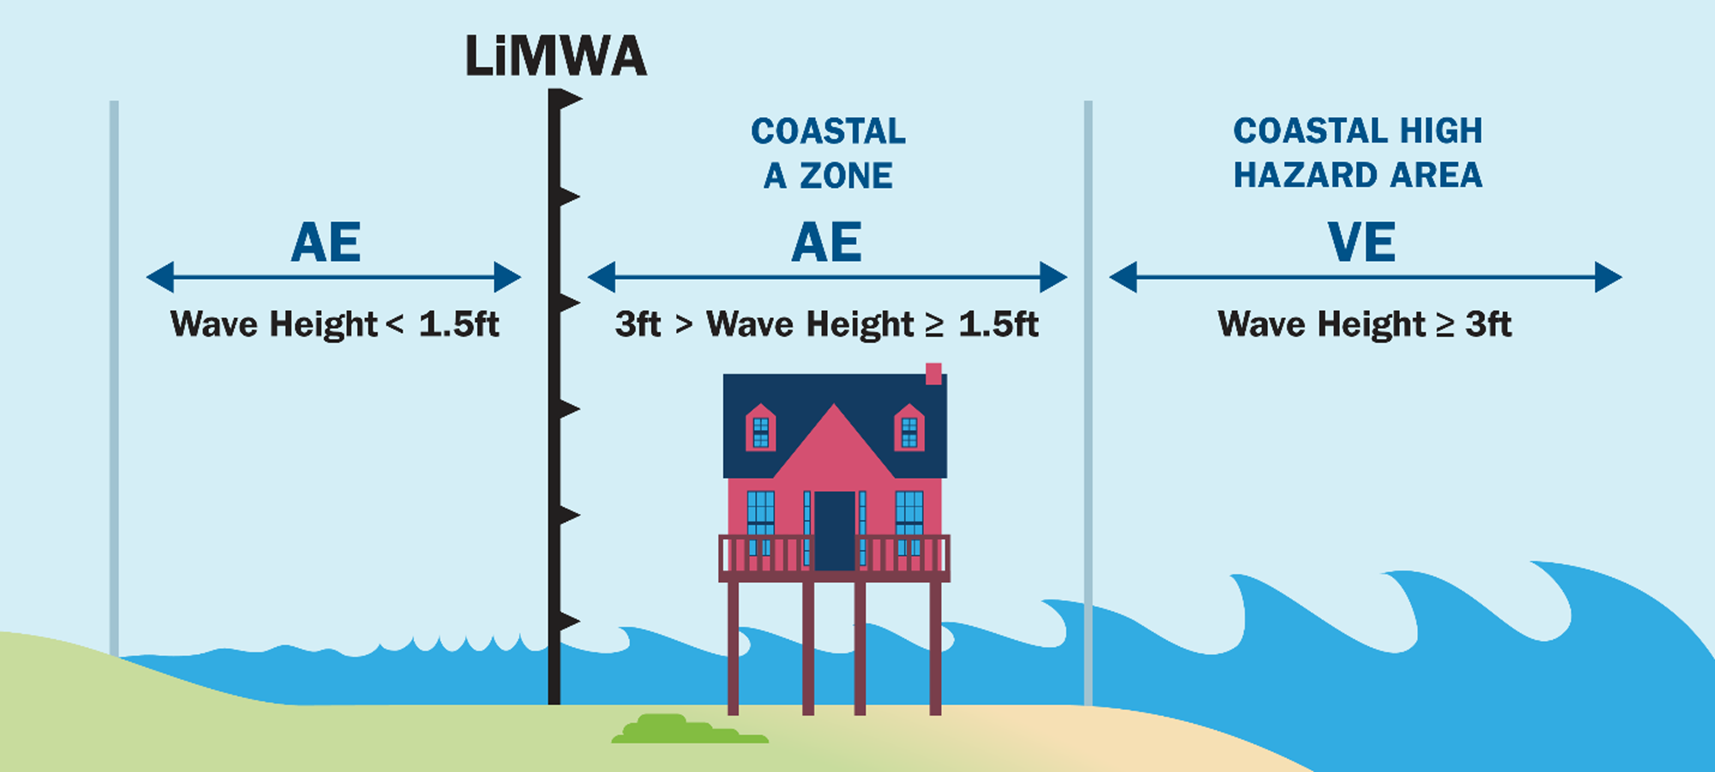 graphic showing wave heights and flood risk